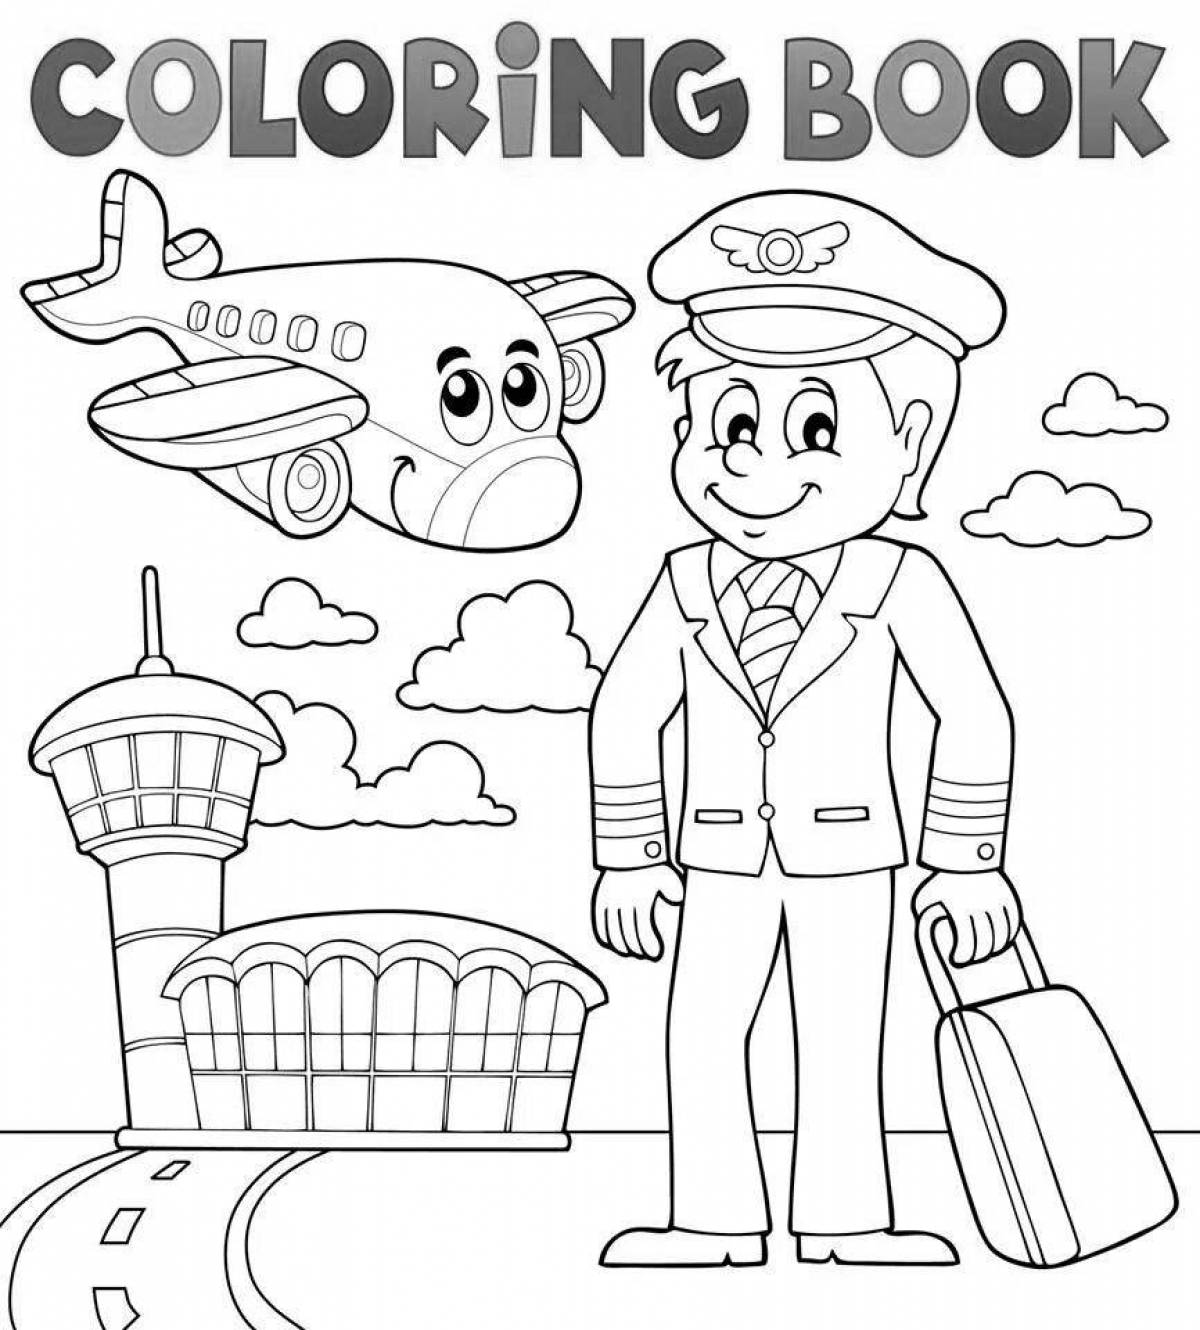 Adorable pilot coloring book for kids